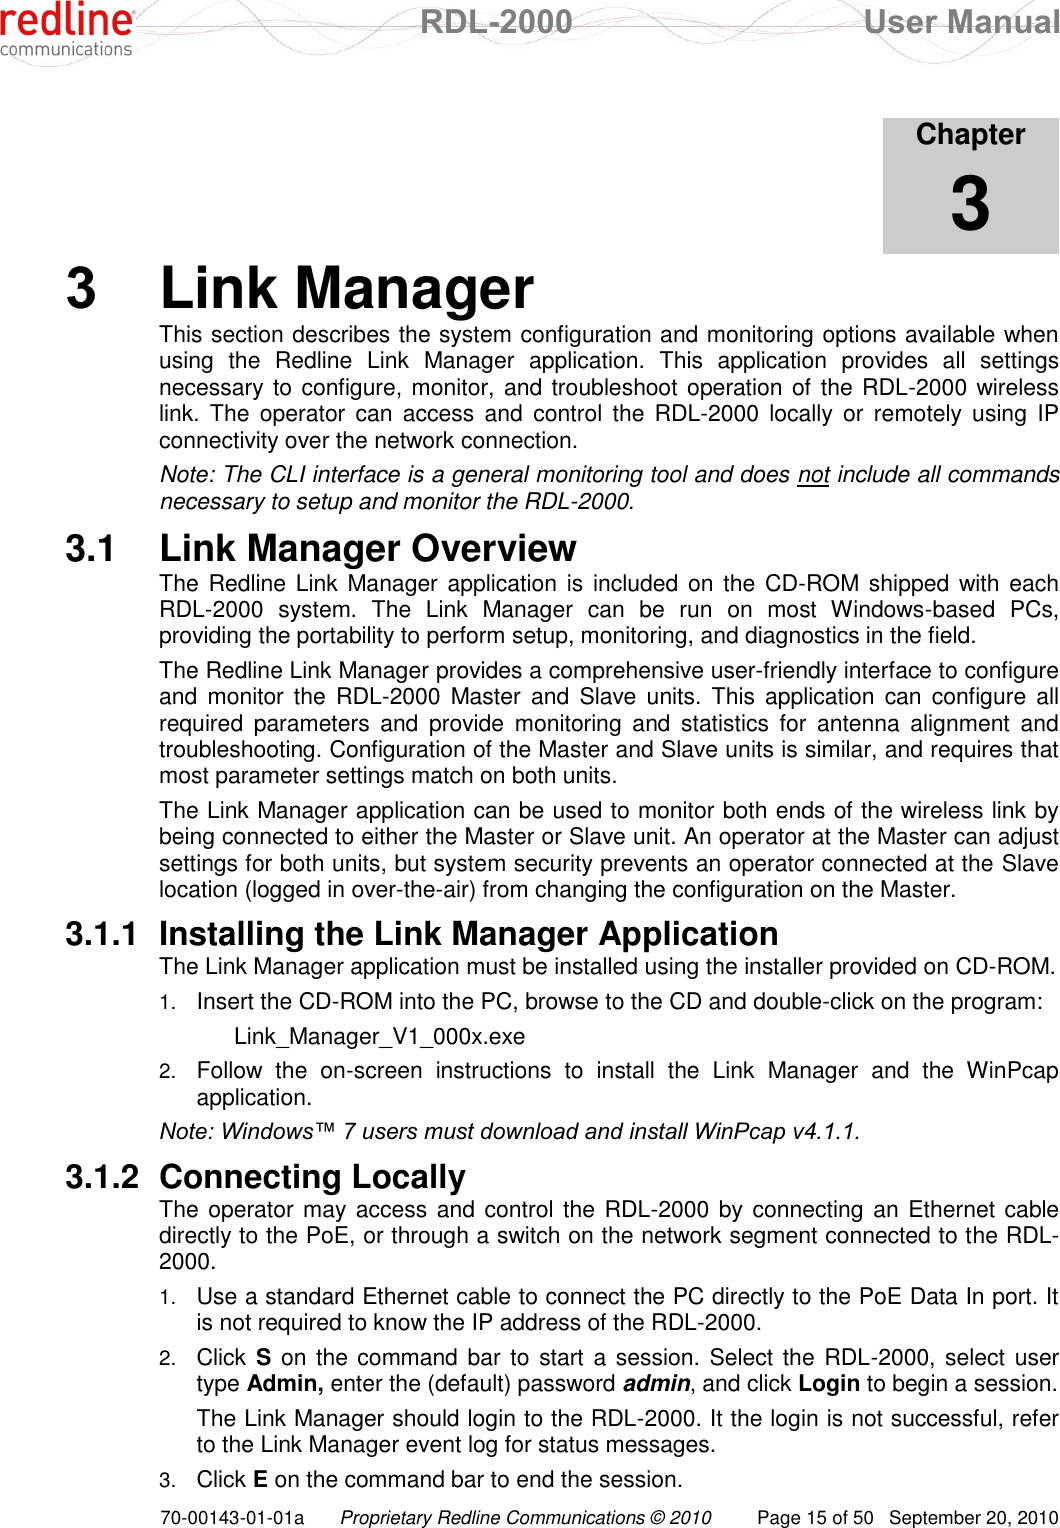  RDL-2000  User Manual 70-00143-01-01a Proprietary Redline Communications © 2010  Page 15 of 50  September 20, 2010            Chapter 3 3  Link Manager This section describes the system configuration and monitoring options available when using  the  Redline  Link  Manager  application.  This  application  provides  all  settings necessary to configure, monitor, and troubleshoot operation of the RDL-2000 wireless link.  The  operator  can  access  and  control  the  RDL-2000  locally  or  remotely using  IP connectivity over the network connection.  Note: The CLI interface is a general monitoring tool and does not include all commands necessary to setup and monitor the RDL-2000. 3.1  Link Manager Overview The Redline Link  Manager application is  included on the CD-ROM shipped with each RDL-2000  system.  The  Link  Manager  can  be  run  on  most  Windows-based  PCs, providing the portability to perform setup, monitoring, and diagnostics in the field.  The Redline Link Manager provides a comprehensive user-friendly interface to configure and  monitor the RDL-2000  Master  and  Slave  units.  This  application can  configure all required  parameters  and  provide  monitoring  and  statistics  for  antenna  alignment  and troubleshooting. Configuration of the Master and Slave units is similar, and requires that most parameter settings match on both units. The Link Manager application can be used to monitor both ends of the wireless link by being connected to either the Master or Slave unit. An operator at the Master can adjust settings for both units, but system security prevents an operator connected at the Slave location (logged in over-the-air) from changing the configuration on the Master. 3.1.1  Installing the Link Manager Application The Link Manager application must be installed using the installer provided on CD-ROM. 1. Insert the CD-ROM into the PC, browse to the CD and double-click on the program:   Link_Manager_V1_000x.exe 2. Follow  the  on-screen  instructions  to  install  the  Link  Manager  and  the  WinPcap application. Note: Windows™ 7 users must download and install WinPcap v4.1.1. 3.1.2  Connecting Locally The operator may access and control the RDL-2000 by connecting an Ethernet  cable directly to the PoE, or through a switch on the network segment connected to the RDL-2000. 1. Use a standard Ethernet cable to connect the PC directly to the PoE Data In port. It is not required to know the IP address of the RDL-2000. 2. Click S on the command  bar to start a session. Select the RDL-2000, select user type Admin, enter the (default) password admin, and click Login to begin a session.   The Link Manager should login to the RDL-2000. It the login is not successful, refer to the Link Manager event log for status messages. 3. Click E on the command bar to end the session. 